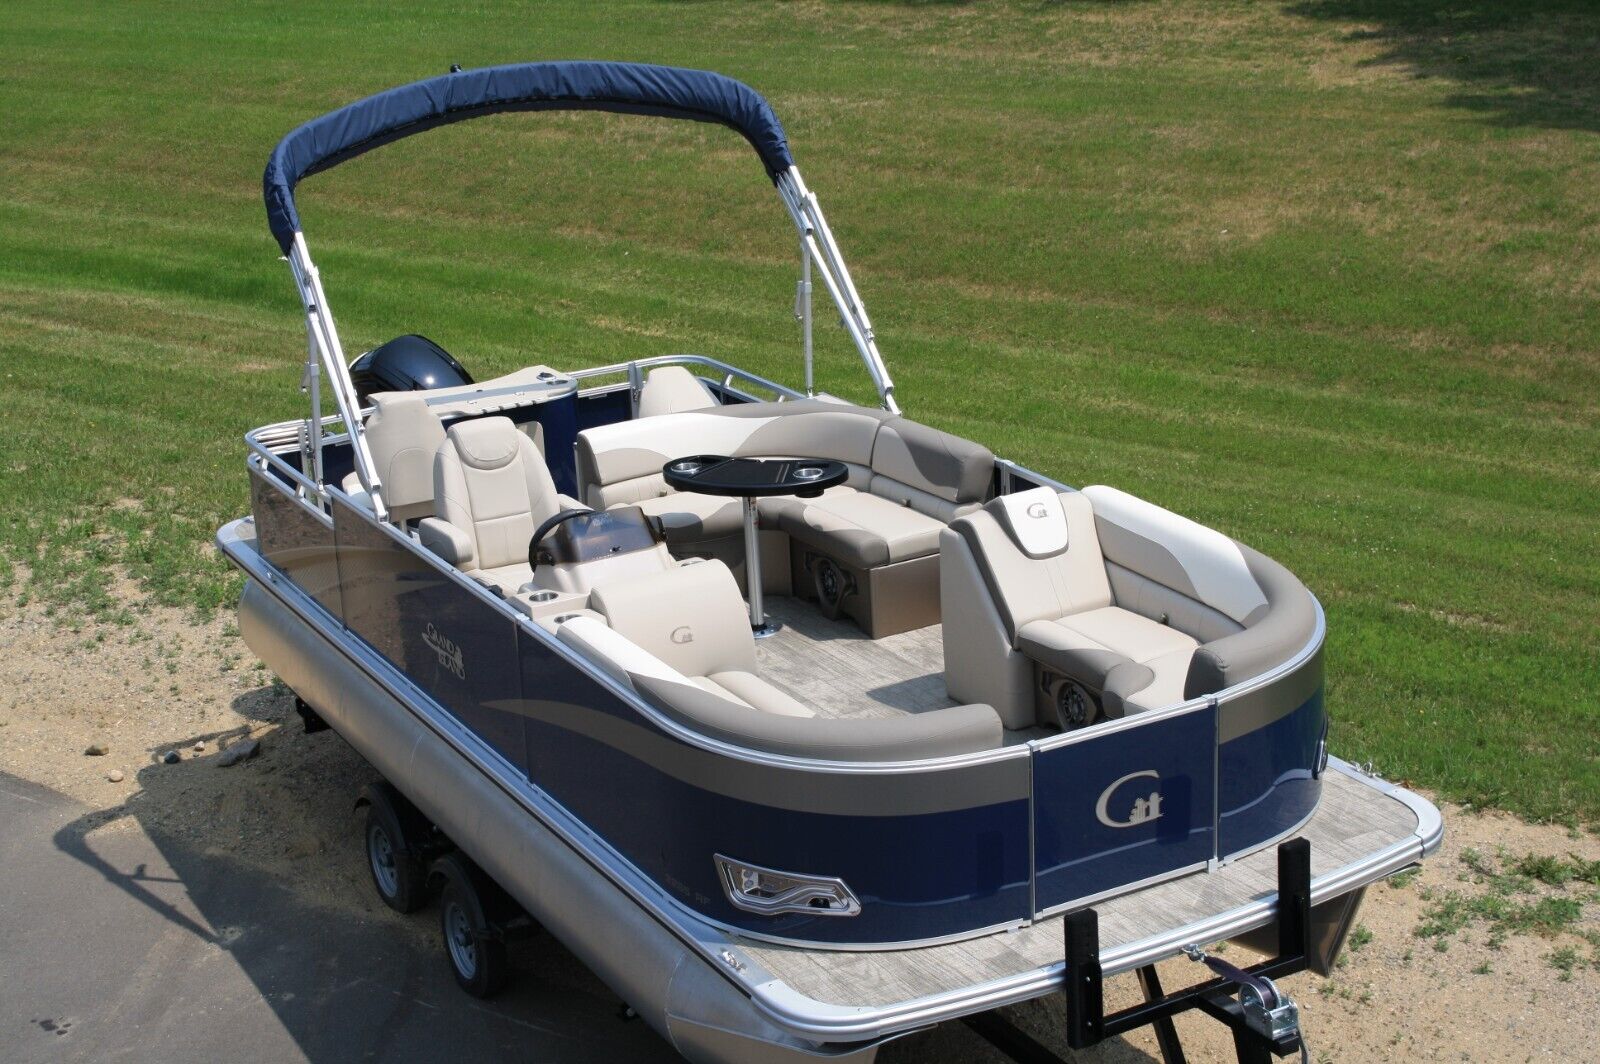 Owner Two tube-New 21 ft pontoon boat with 115 hp and trailer